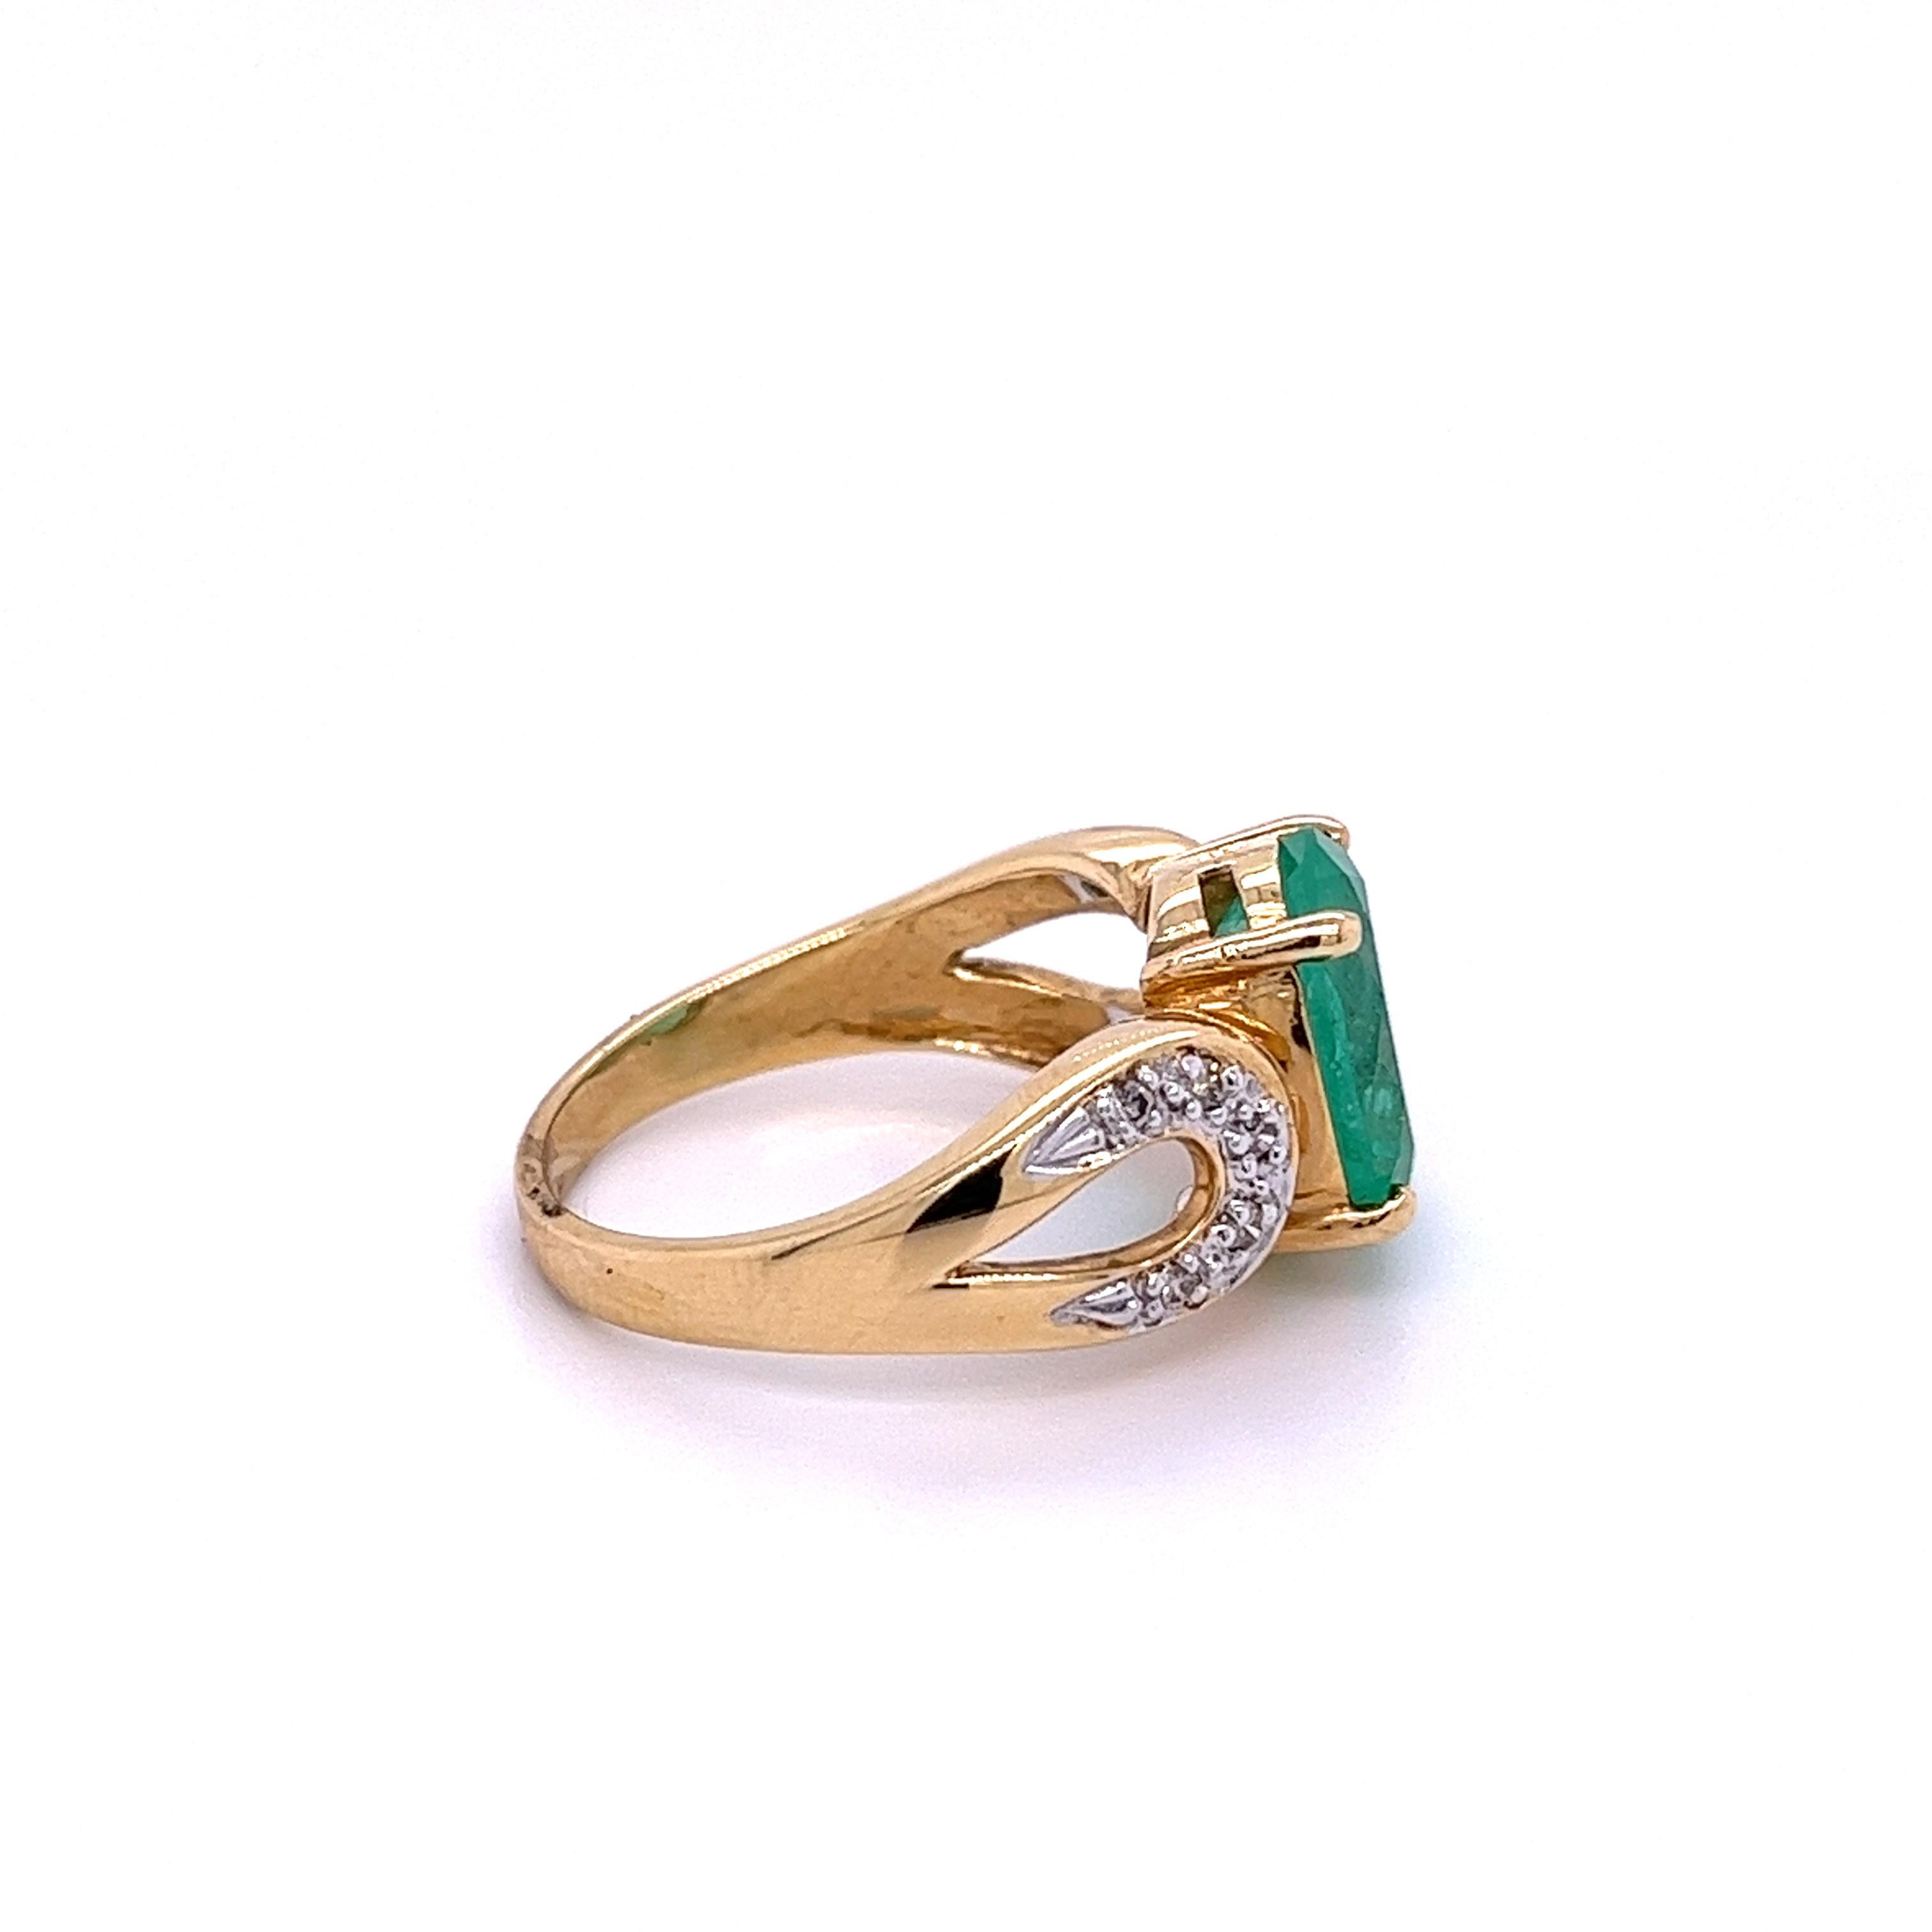 3 carat Oval Cut Colombian Emerald and Diamond Vintage Ring in 14k Yellow Gold In New Condition For Sale In Miami, FL